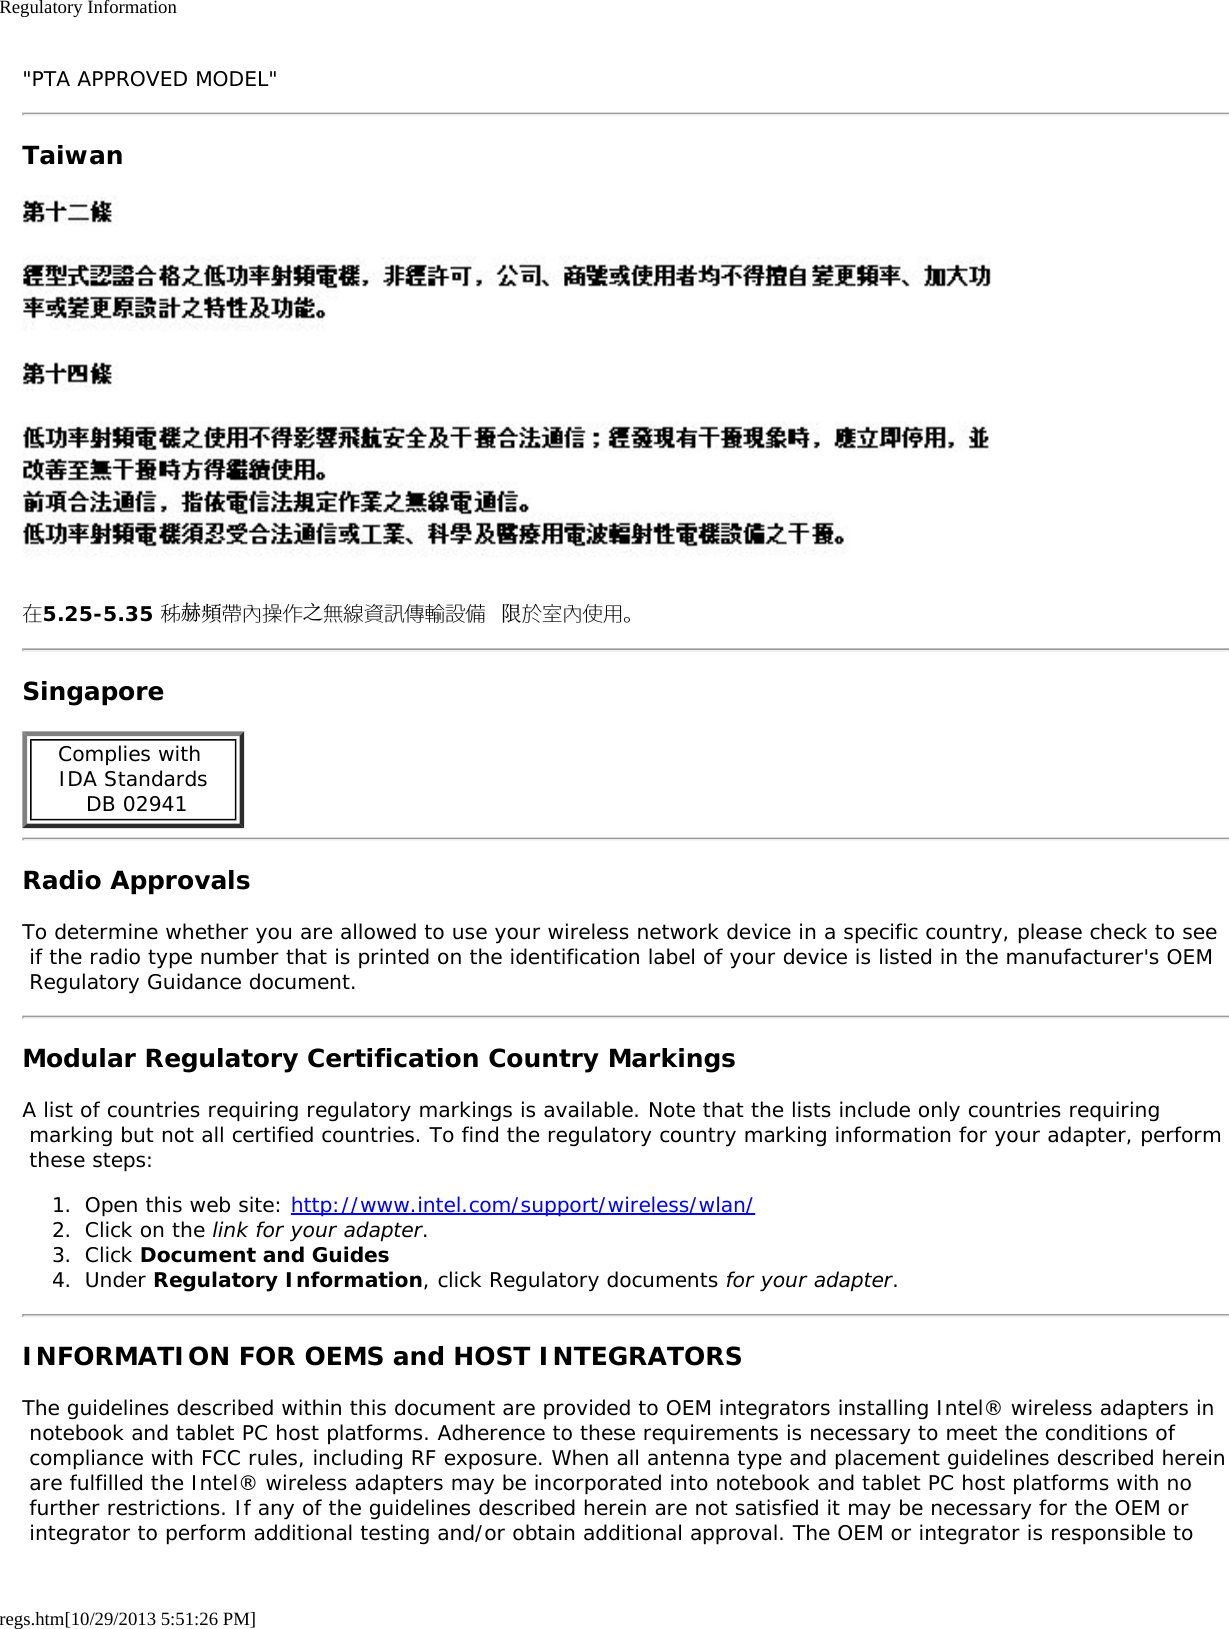 Regulatory Informationregs.htm[10/29/2013 5:51:26 PM]&quot;PTA APPROVED MODEL&quot;Taiwan在5.25-5.35 秭赫頻帶內操作之無線資訊傳輸設備 限於室內使用。SingaporeComplies with  IDA Standards  DB 02941Radio ApprovalsTo determine whether you are allowed to use your wireless network device in a specific country, please check to see if the radio type number that is printed on the identification label of your device is listed in the manufacturer&apos;s OEM Regulatory Guidance document.Modular Regulatory Certification Country MarkingsA list of countries requiring regulatory markings is available. Note that the lists include only countries requiring marking but not all certified countries. To find the regulatory country marking information for your adapter, perform these steps:1.  Open this web site: http://www.intel.com/support/wireless/wlan/2.  Click on the link for your adapter.3.  Click Document and Guides4.  Under Regulatory Information, click Regulatory documents for your adapter.INFORMATION FOR OEMS and HOST INTEGRATORSThe guidelines described within this document are provided to OEM integrators installing Intel® wireless adapters in notebook and tablet PC host platforms. Adherence to these requirements is necessary to meet the conditions of compliance with FCC rules, including RF exposure. When all antenna type and placement guidelines described herein are fulfilled the Intel® wireless adapters may be incorporated into notebook and tablet PC host platforms with no further restrictions. If any of the guidelines described herein are not satisfied it may be necessary for the OEM or integrator to perform additional testing and/or obtain additional approval. The OEM or integrator is responsible to